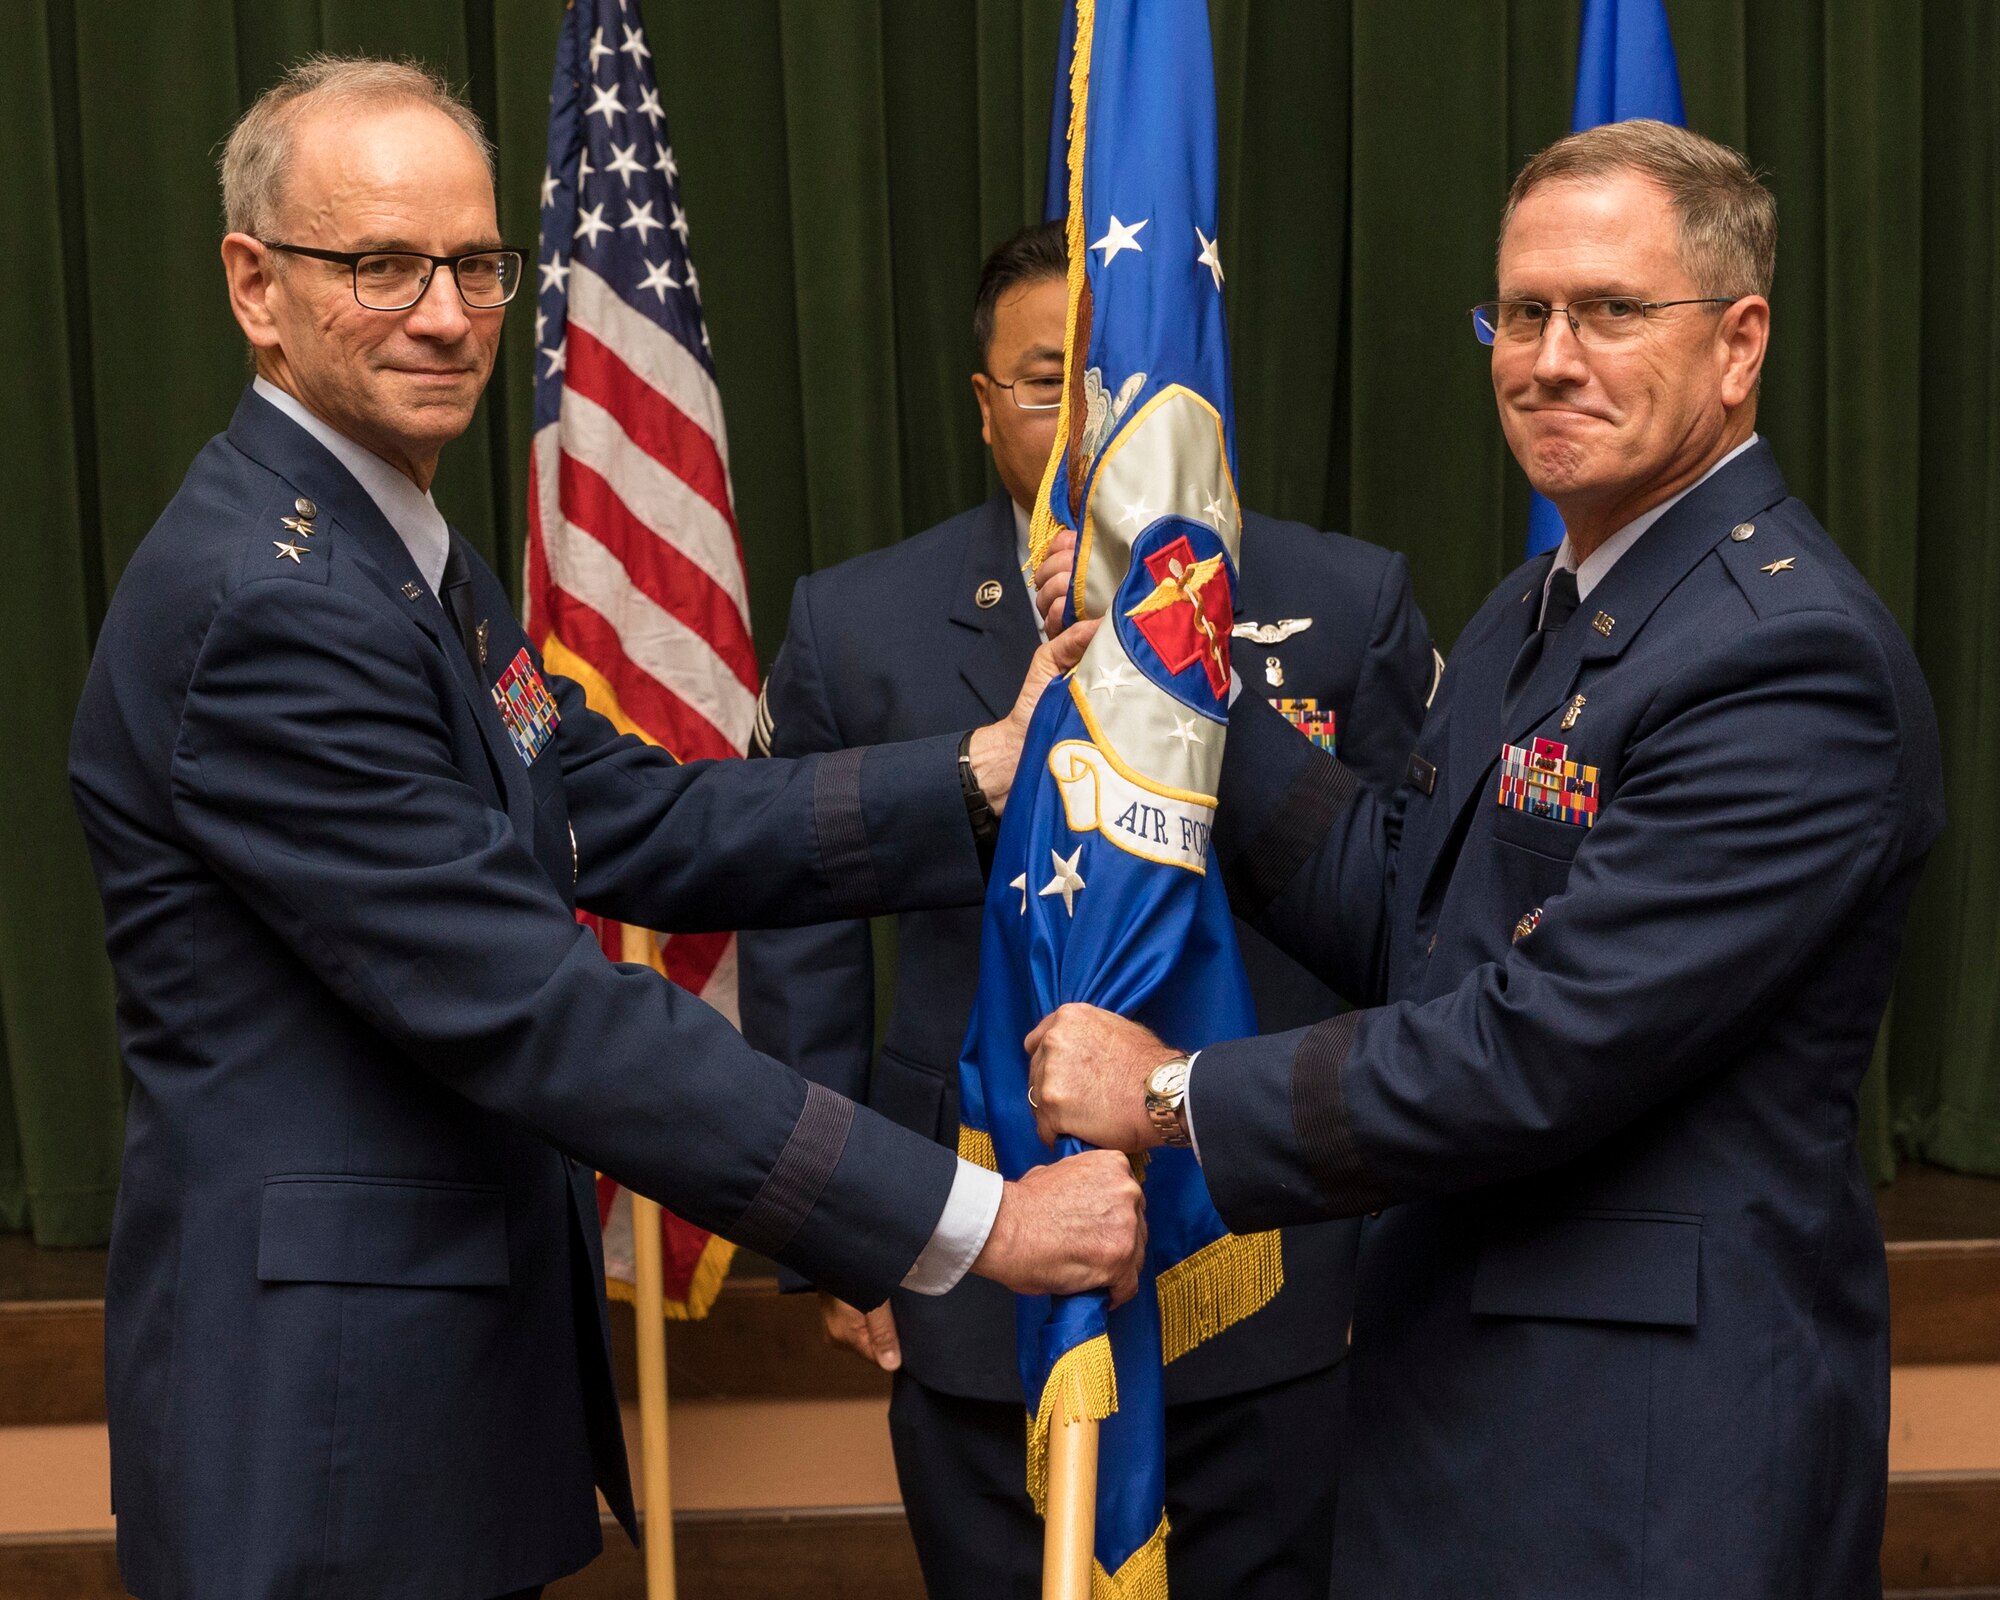 Lt. Gen. Mark A. Ediger, U.S. Air Force Surgeon General, facilitates the passing of the guidon to Brig. Gen. James H. Dienst, Air Force Medical Operations Agency commander, during a change of command ceremony at Joint Base San Antonio-Lackland, Texas, May 22, 2018. (U.S Air Force photo by Ismael Ortega)